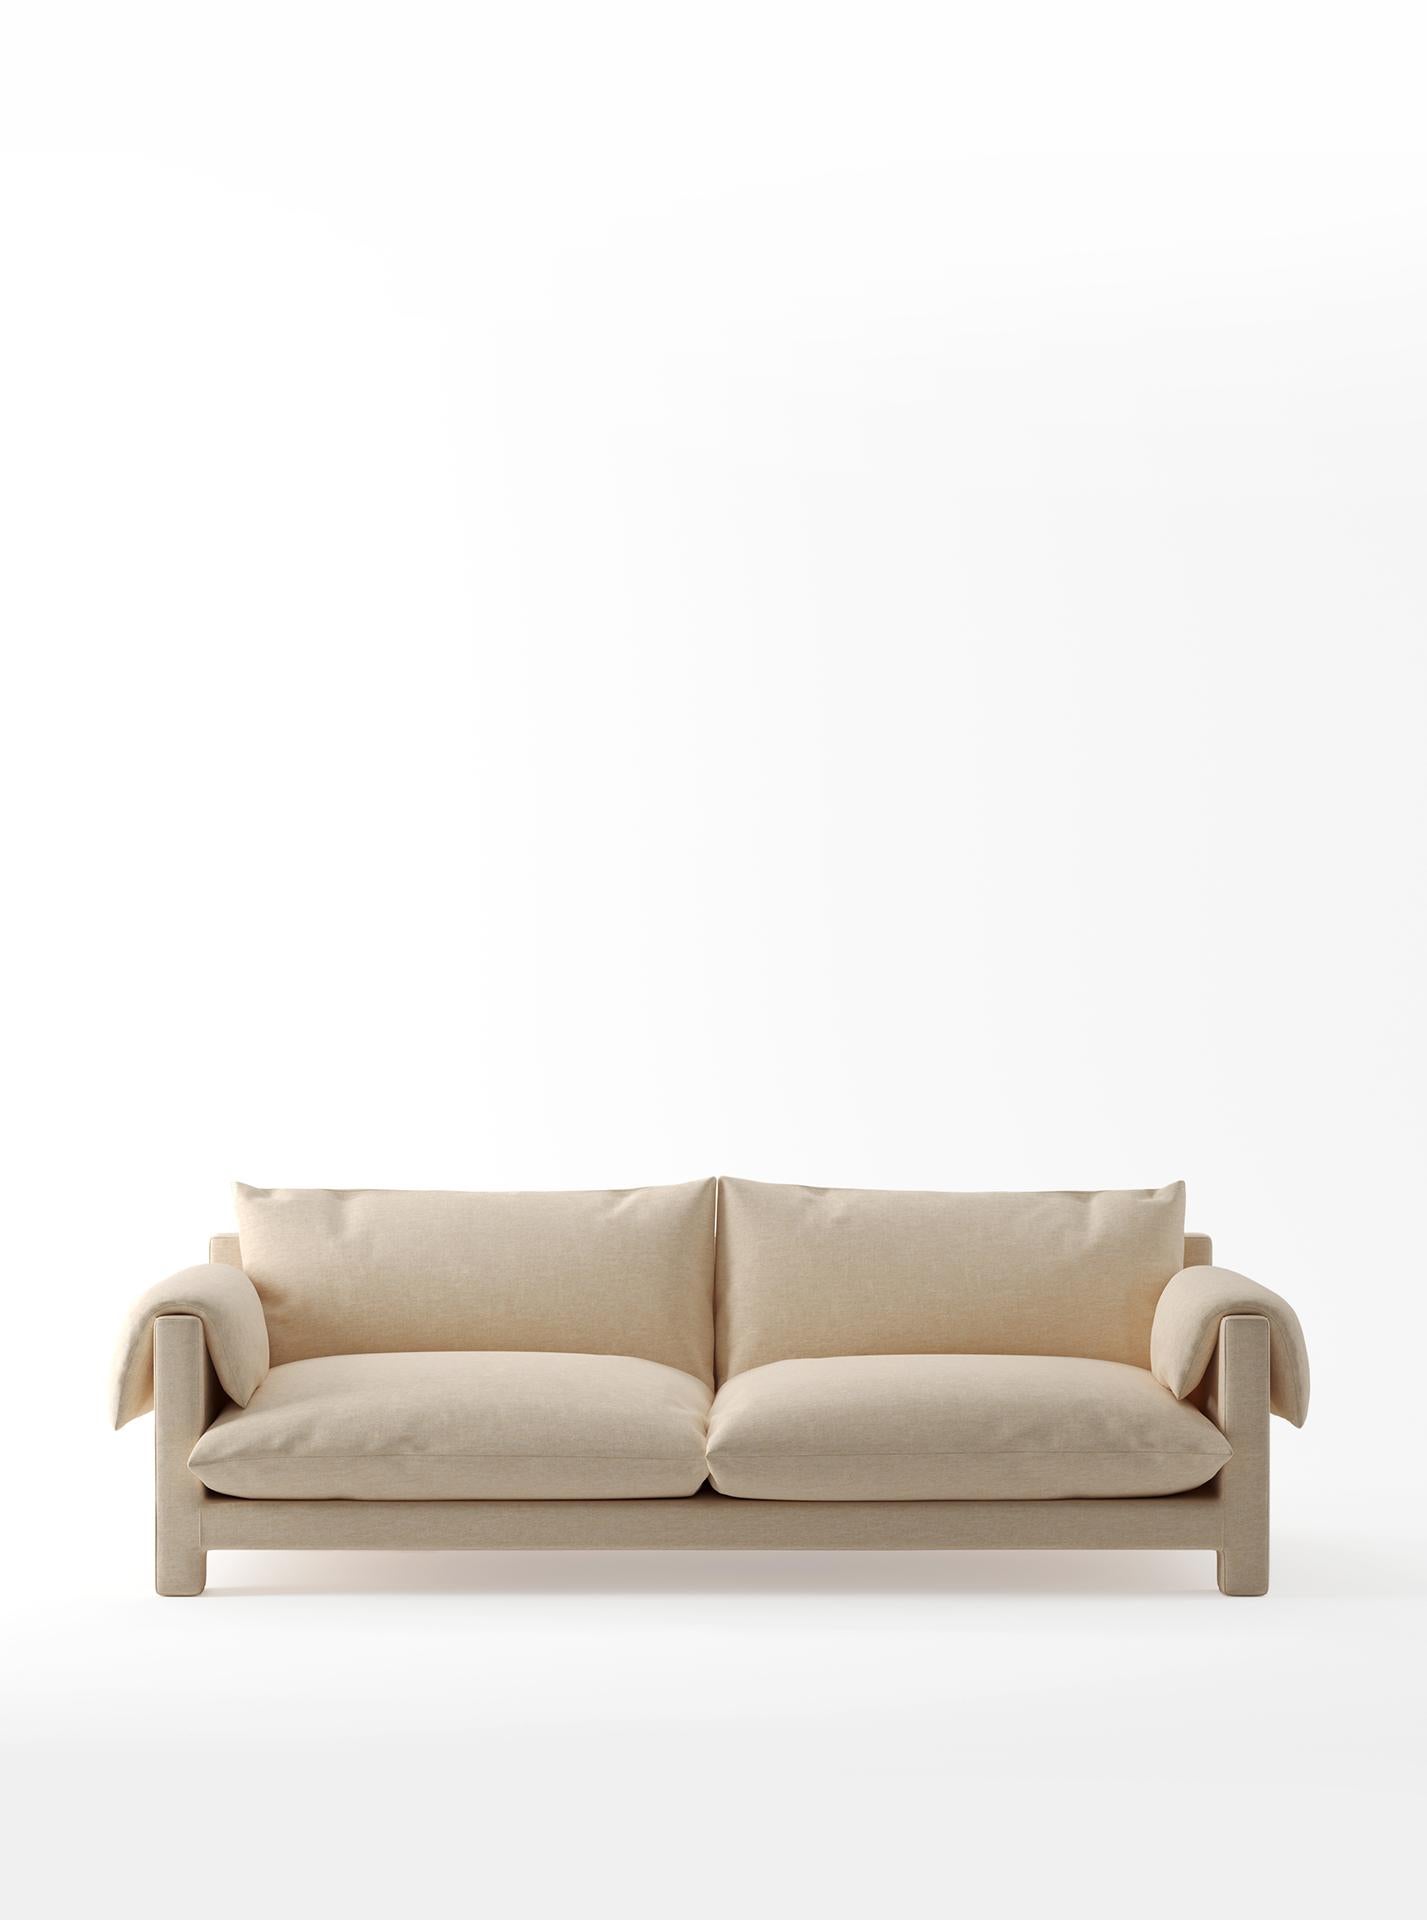 La Plume is generous and inviting, with a focus on comfort unlike anything we’ve ever made before.

All of our sofas are made with solid FSC European hardwood frames, which we guarantee for life.

With sustainability in mind, we prioritize renewable